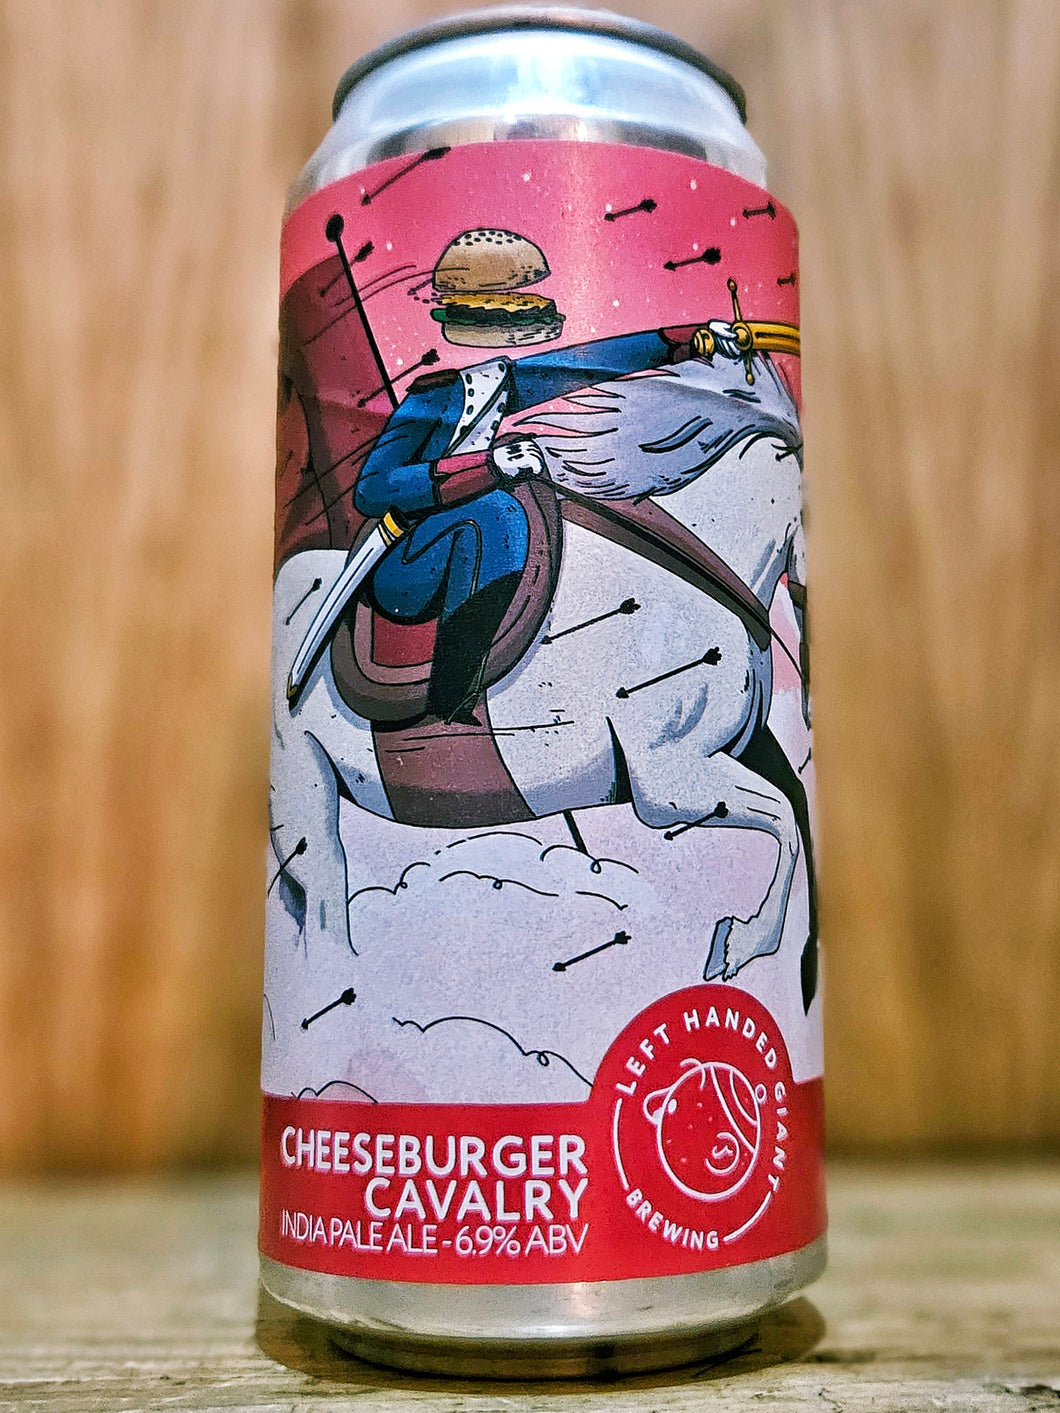 Left Handed Giant - Cheeseburger Cavalry